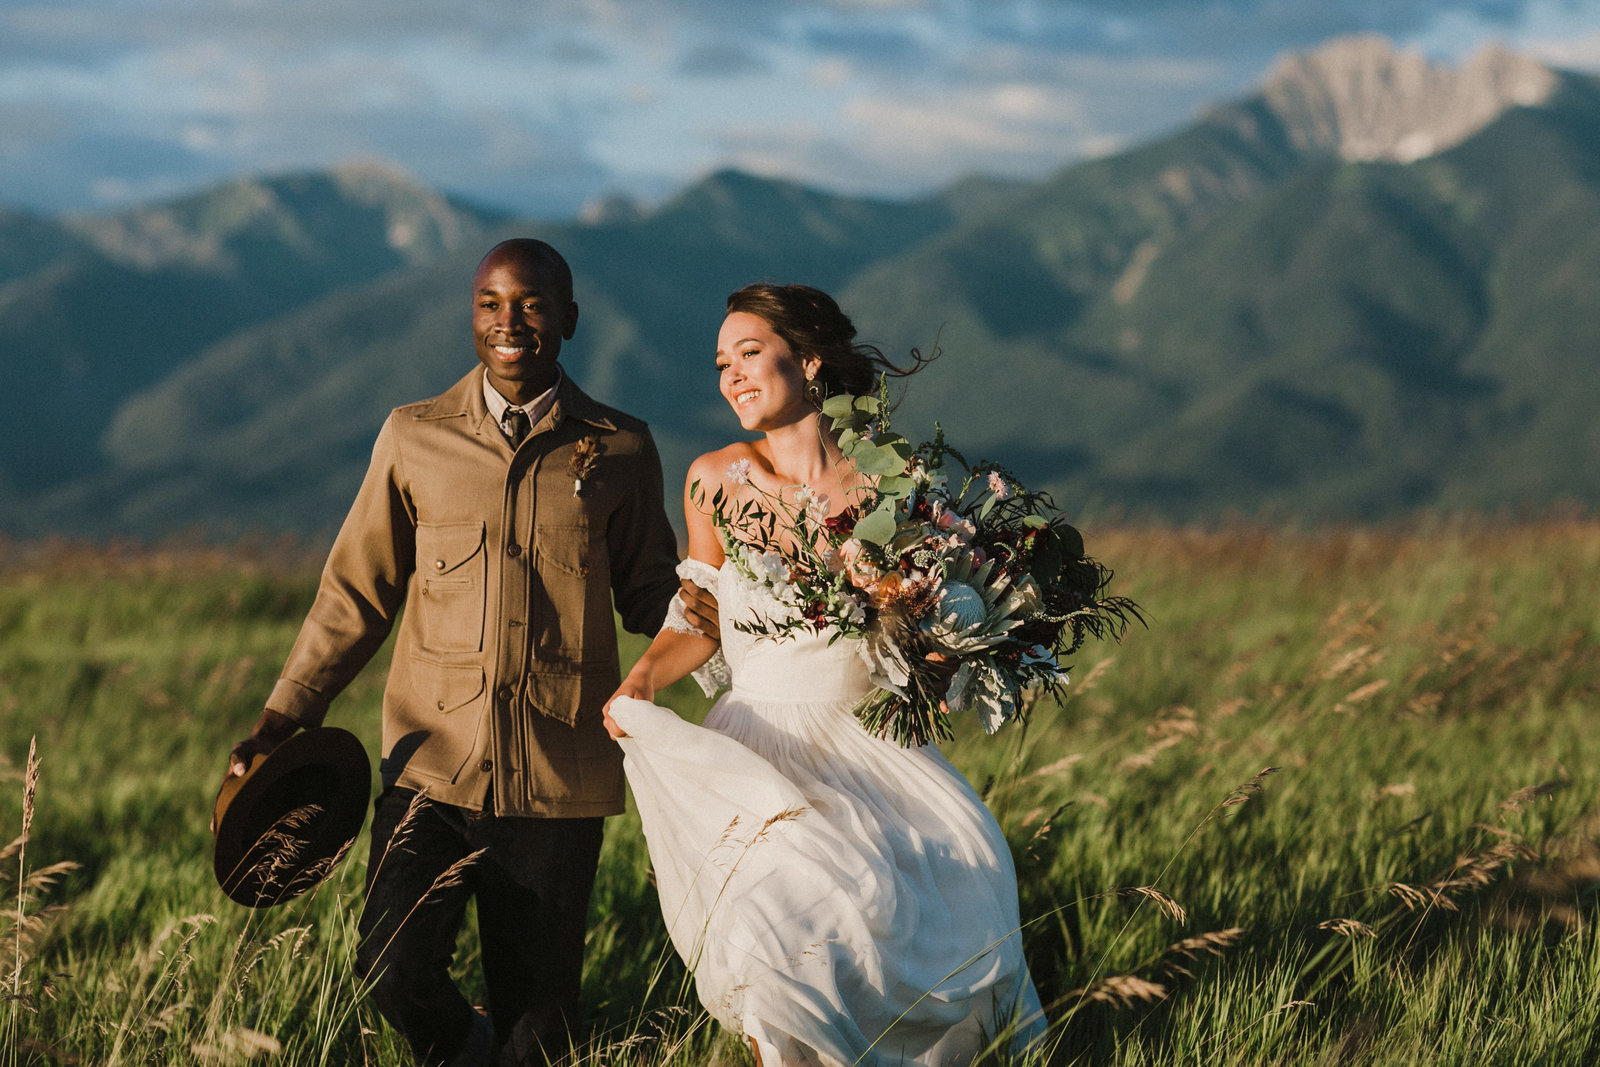 Bride and groom models strolling through the open fields in Missoula, for this styled adventure wedding shoot.